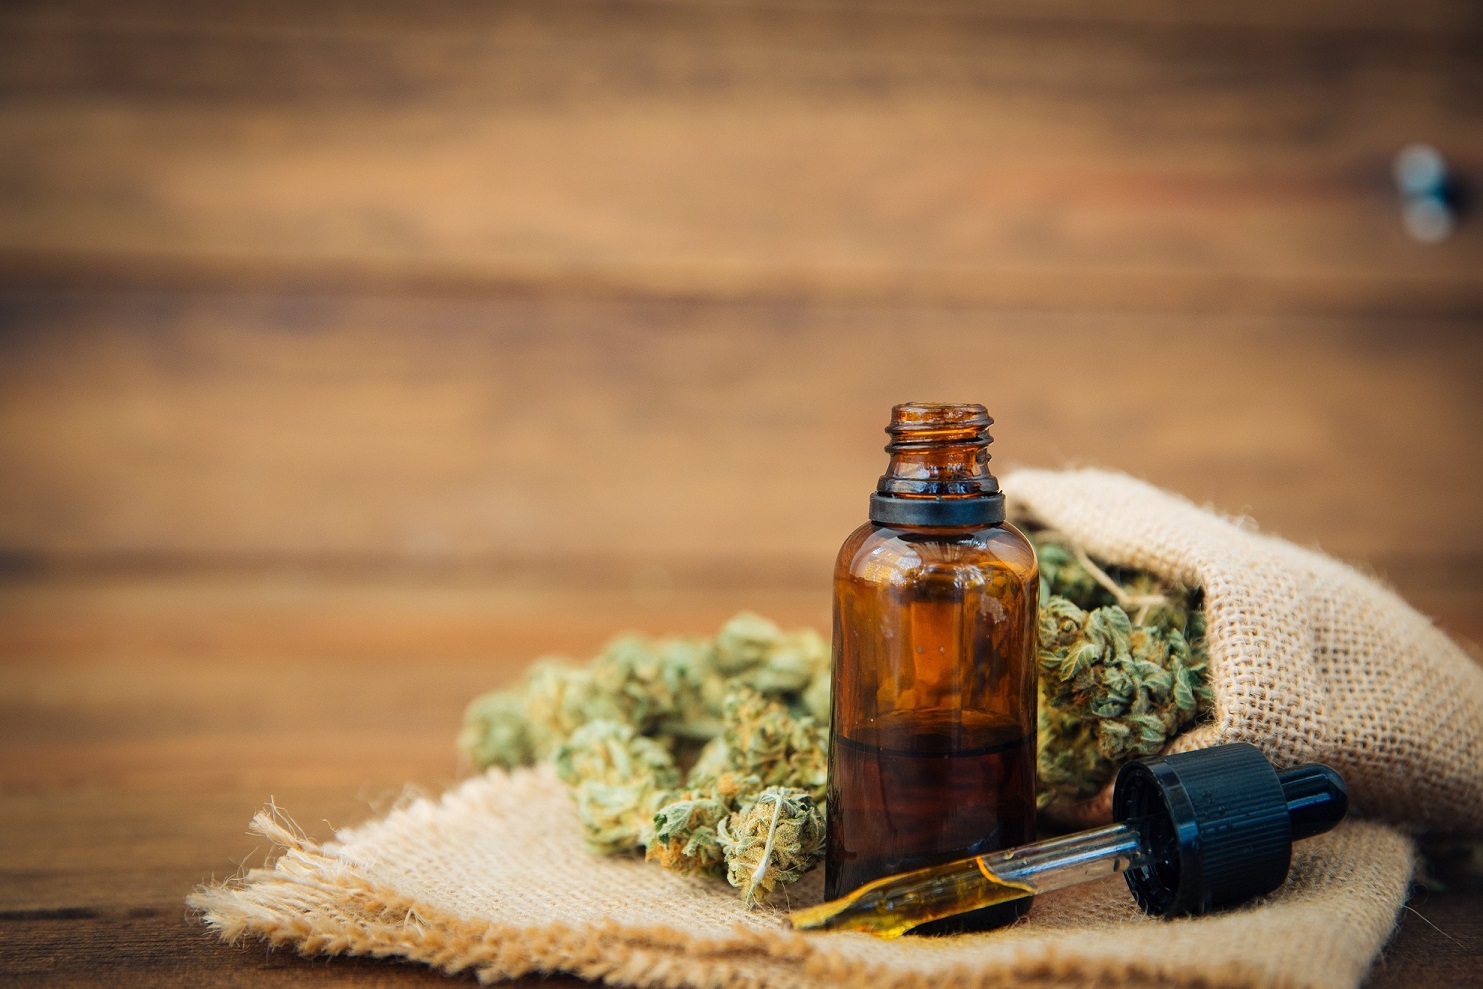 How Is CBD Oil Made And Extracted?